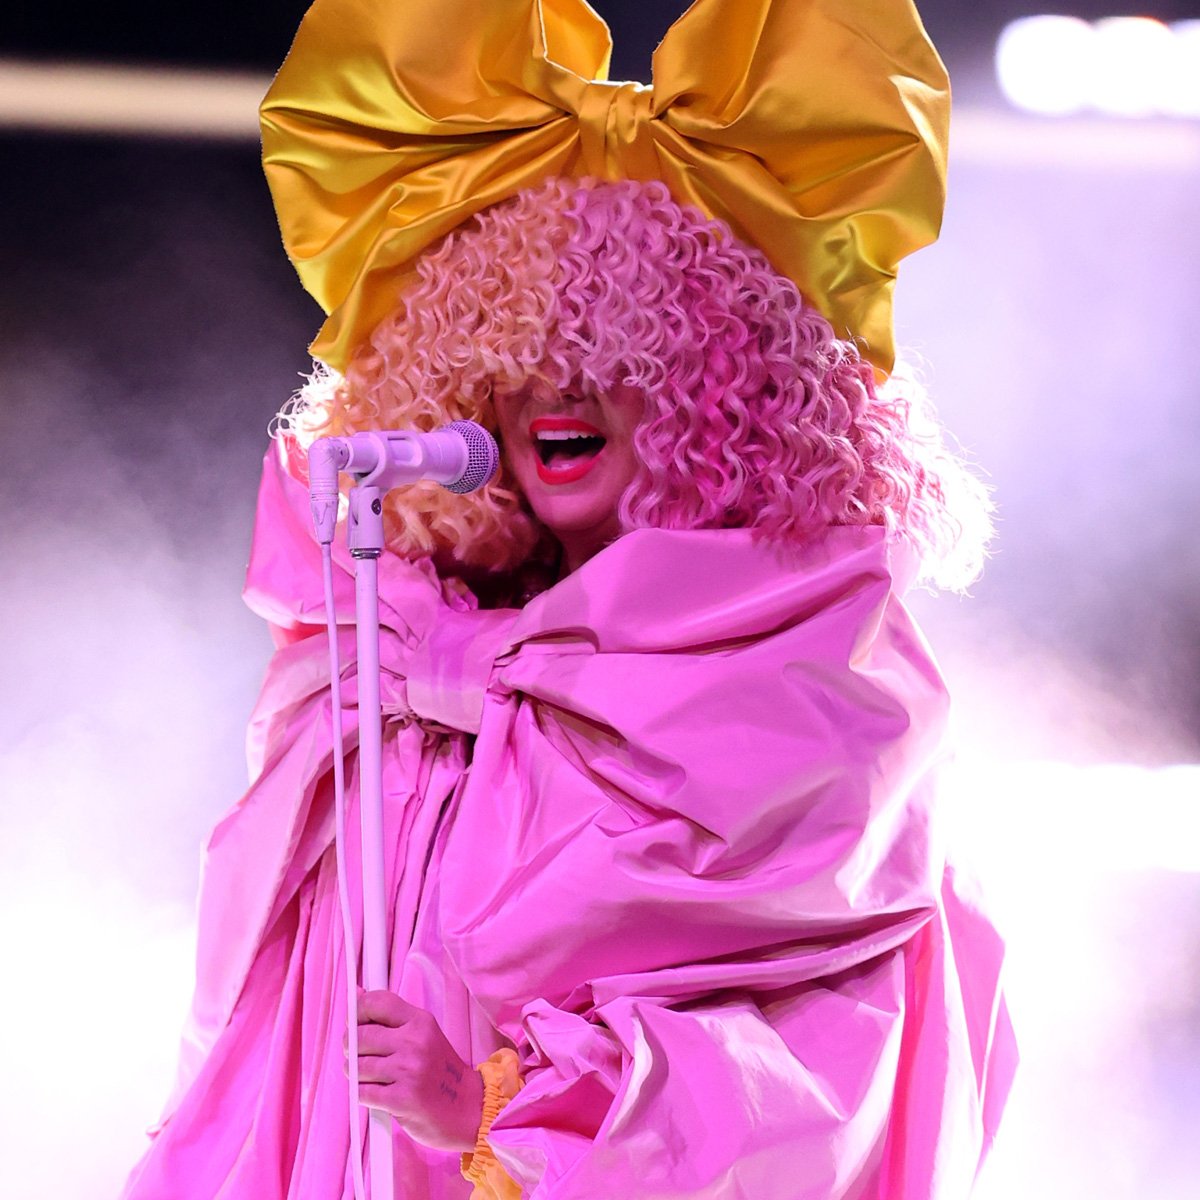 Billboard Music Awards 2020: See SIa, Cher, Billie Eilish and More Stars Attending the Show